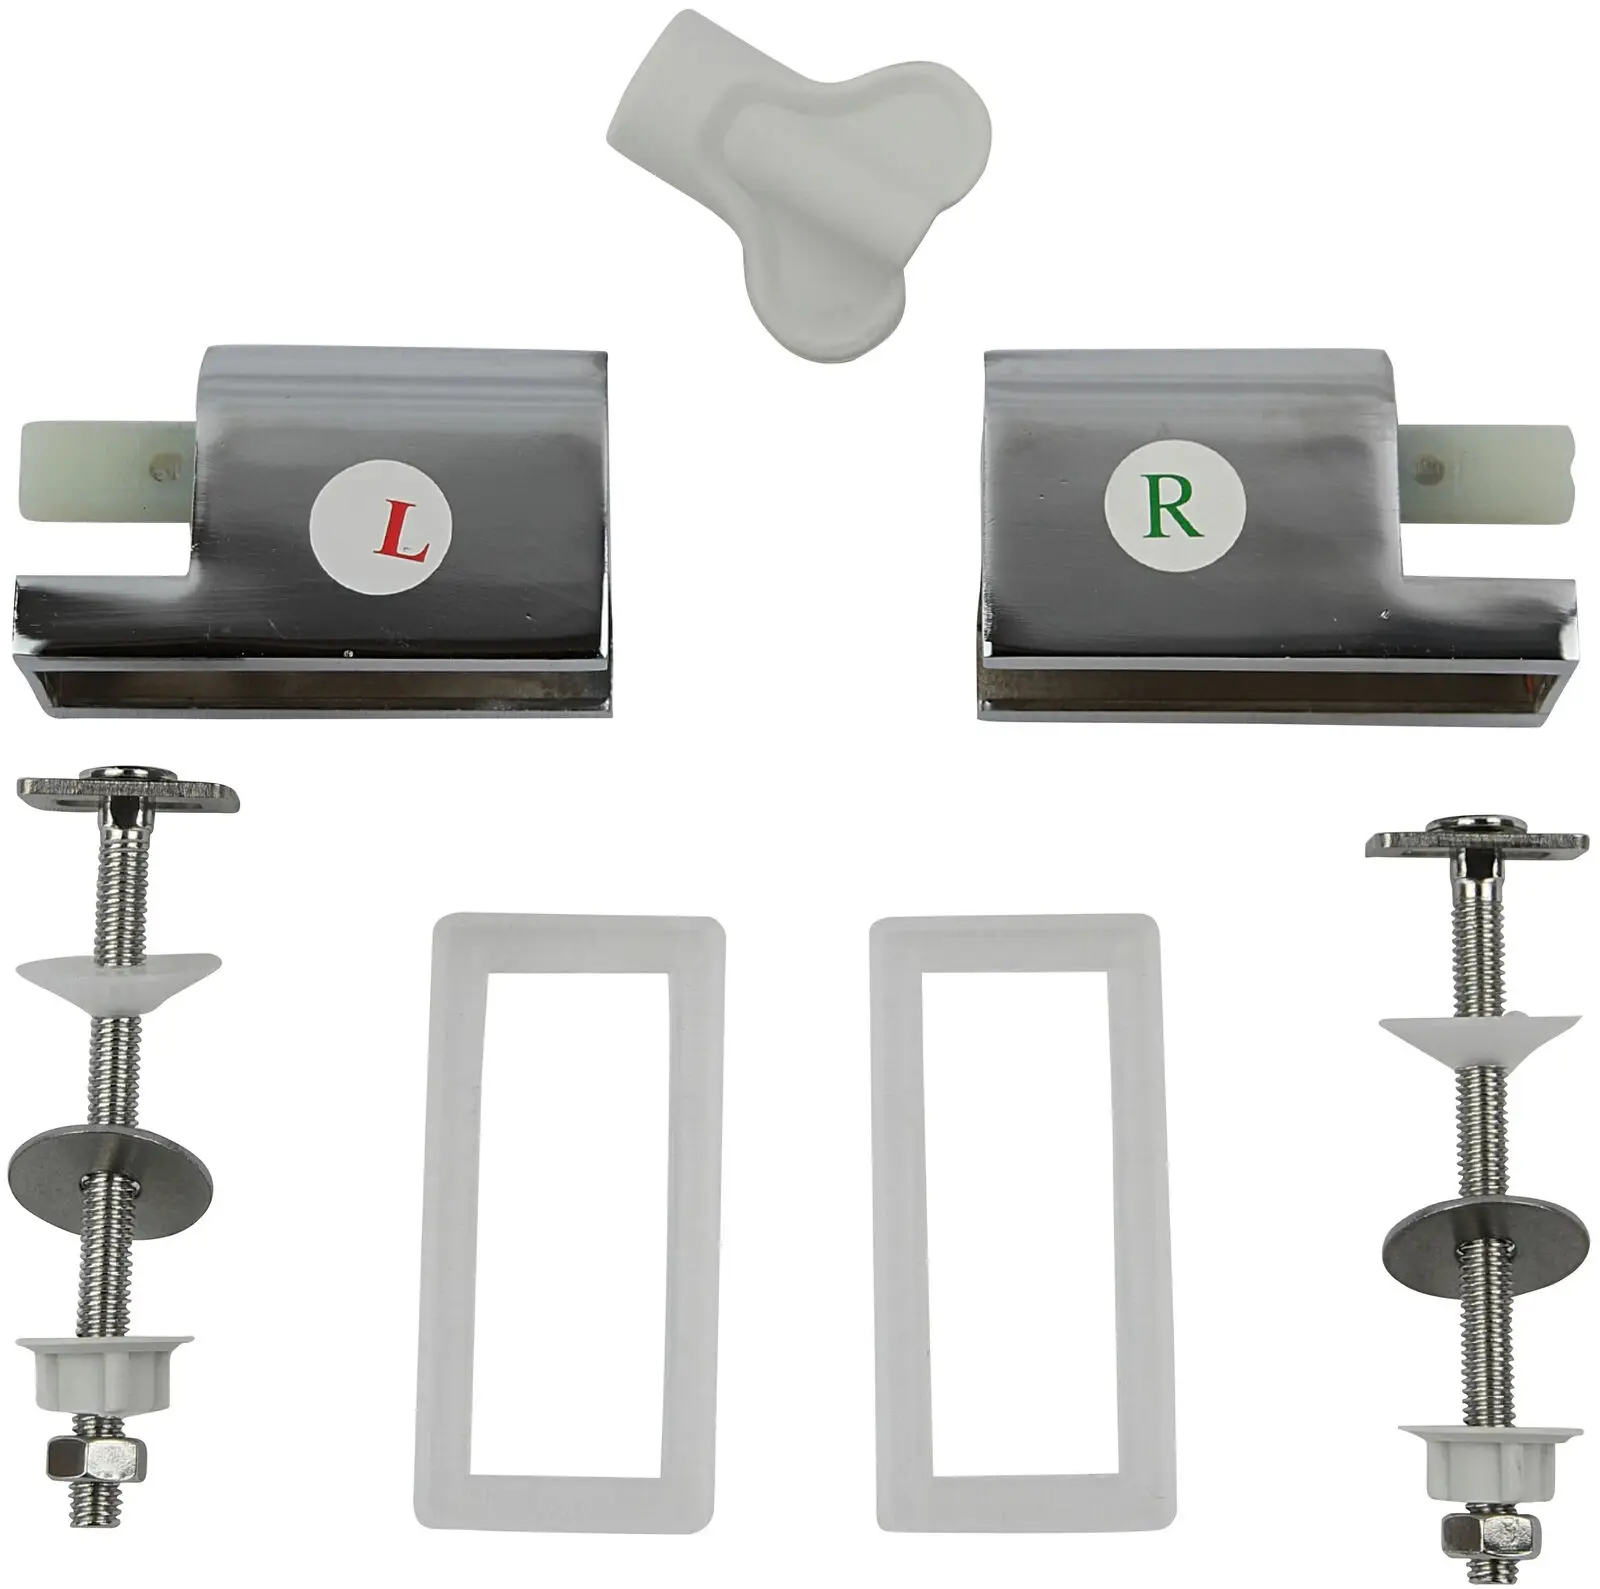 

2PCS Toilet Seat Hinge To Top Close Soft Release Quick Install Toilet Kit For Most Standard Toilet Seats With Top Fix Hinge